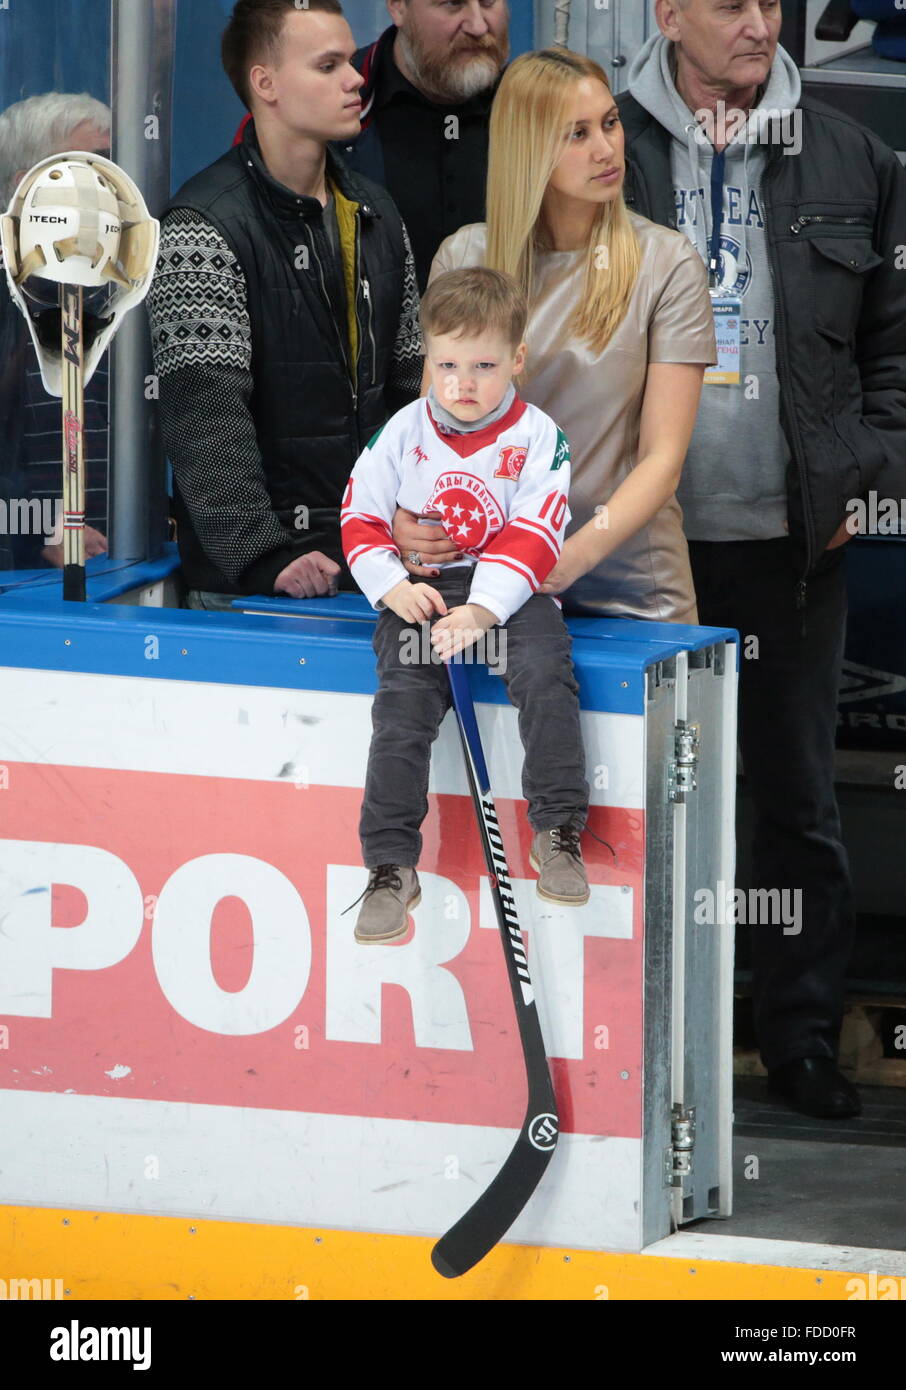 Moscow, Russia. 30th Jan, 2016. Pavel Bure's wife Alina and son ...